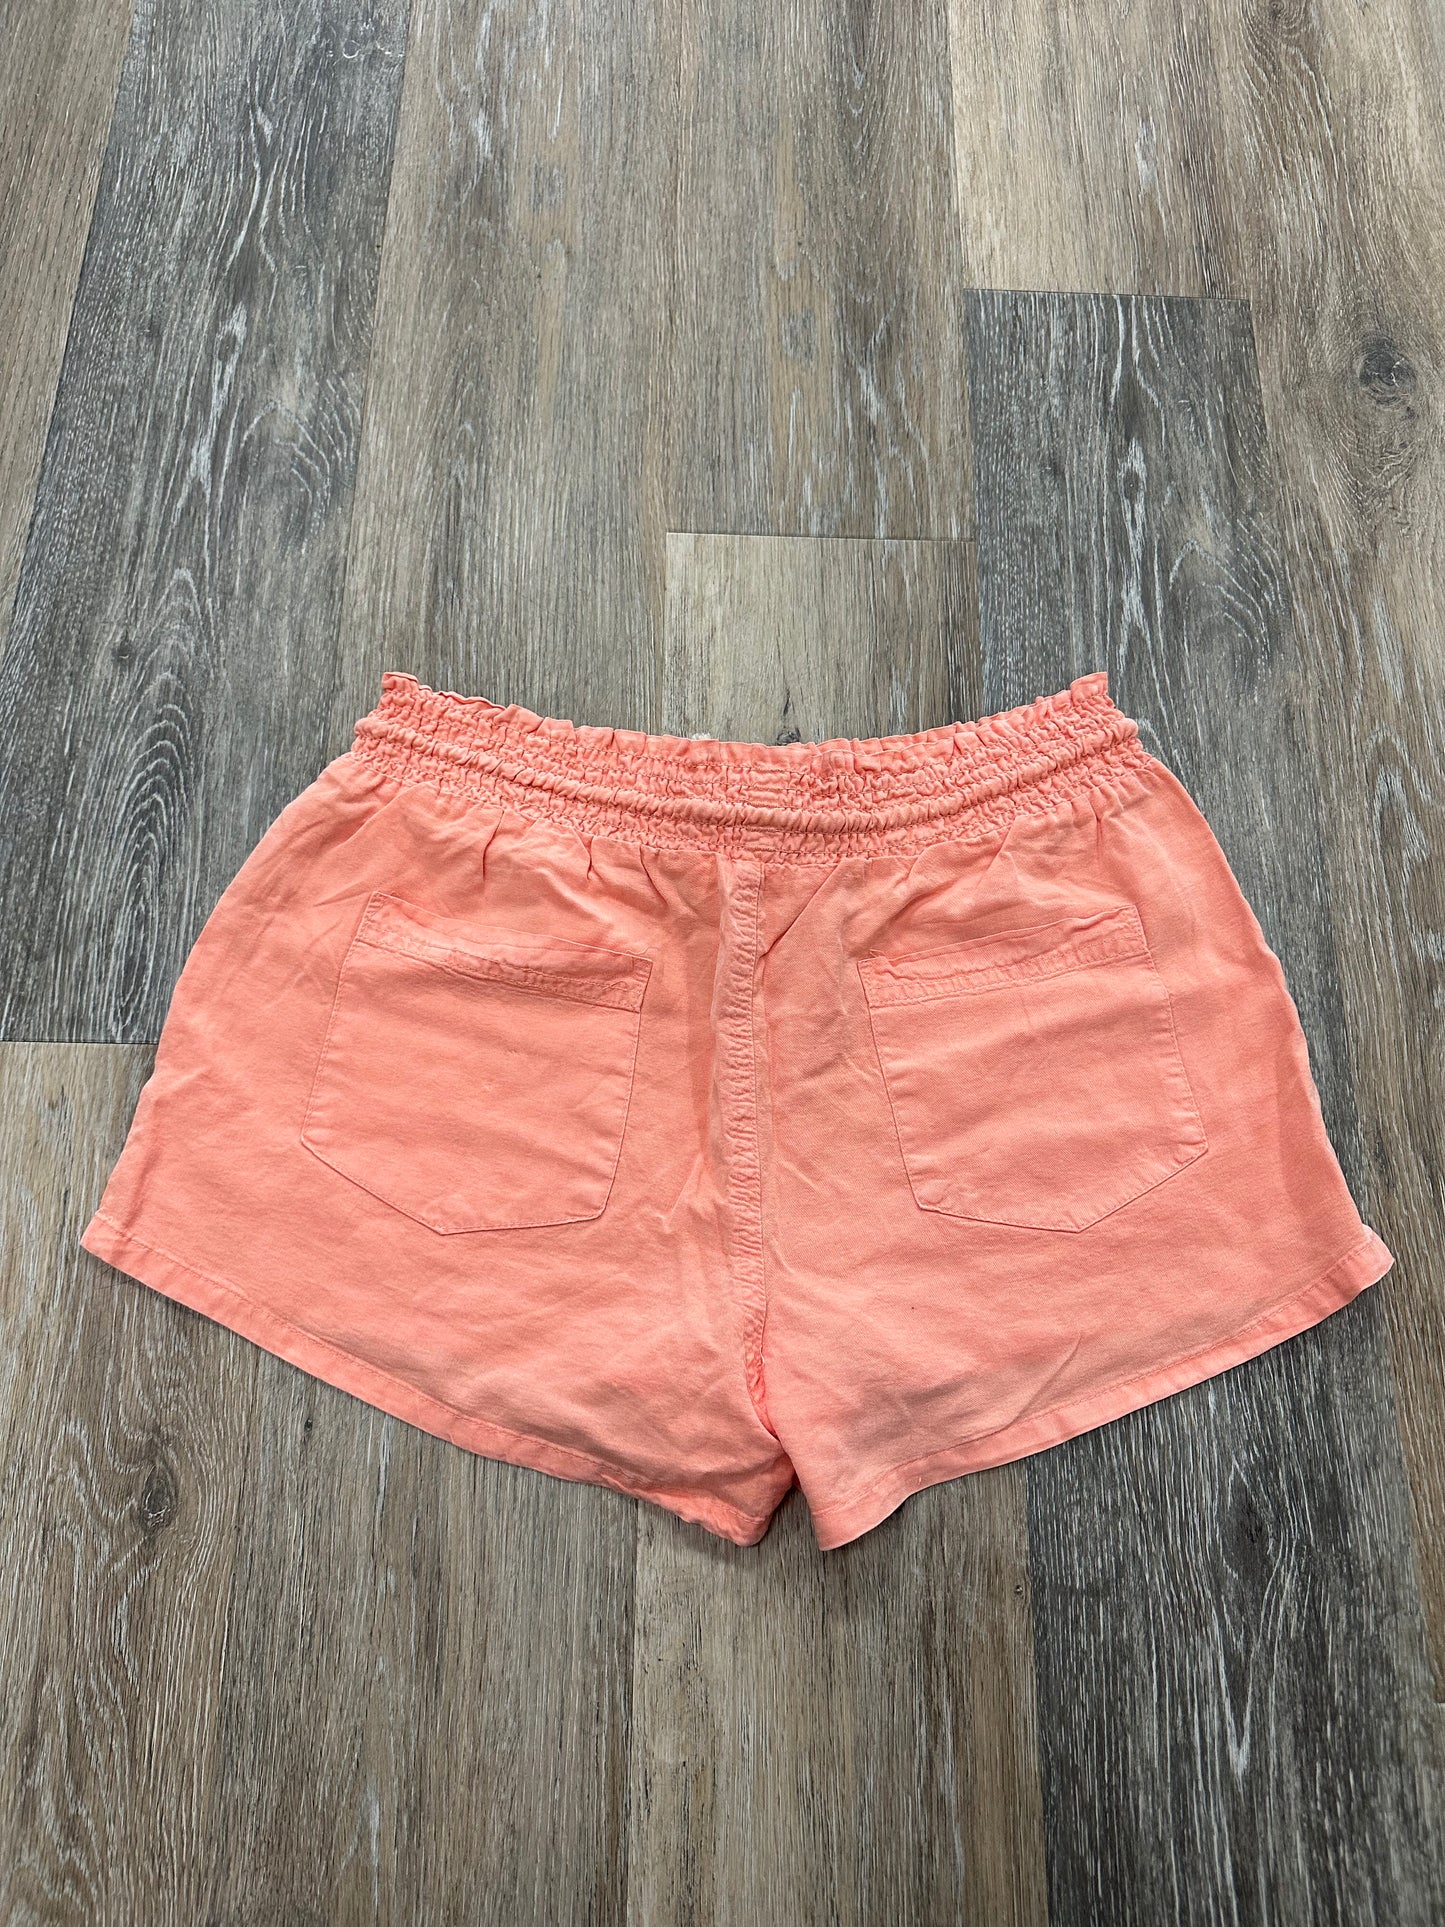 Shorts By Love Tree  Size: L